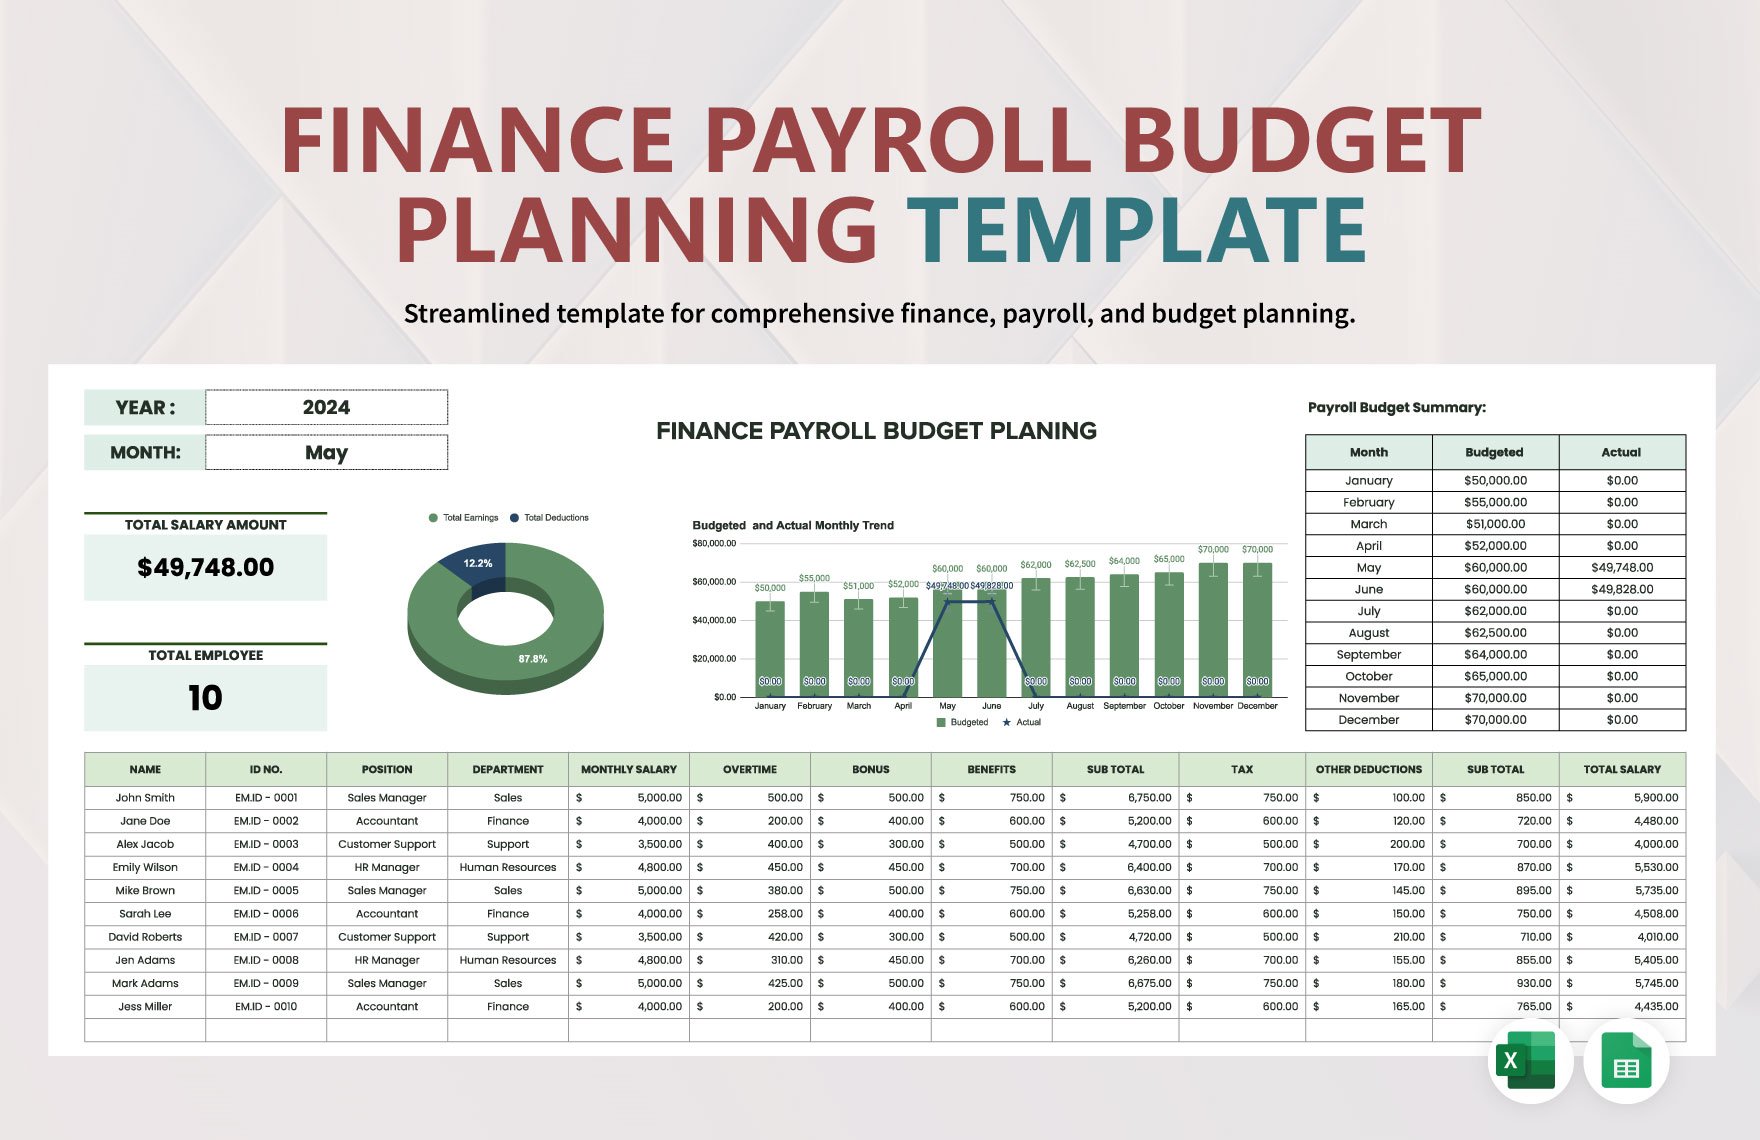 Finance Payroll Budget Planning Template in Excel, Google Sheets